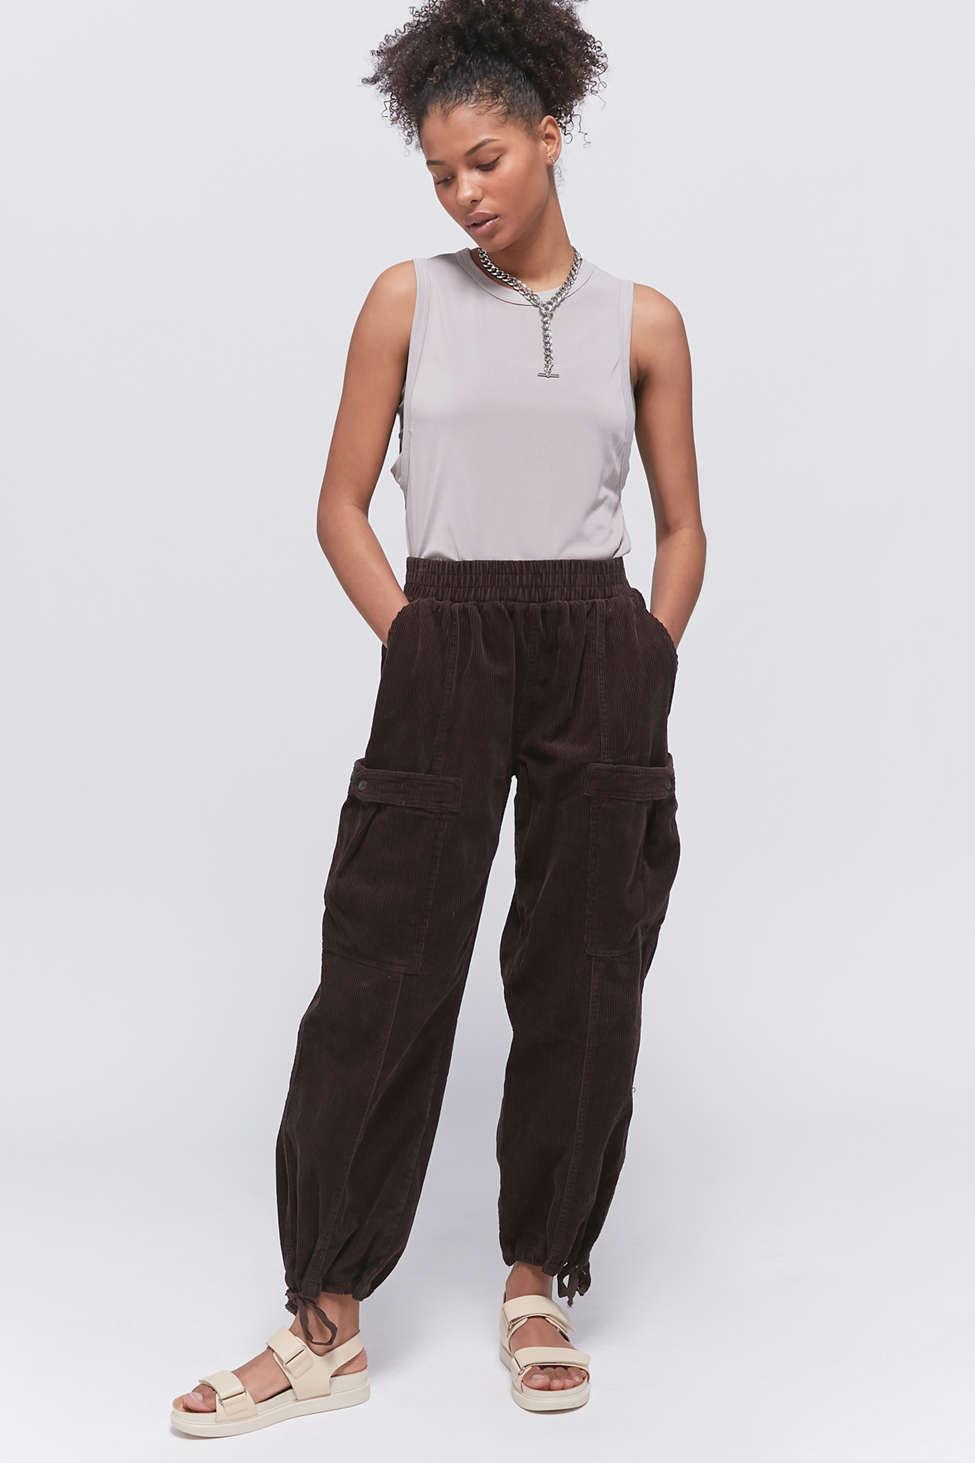 Urban Outfitters Uo Vivi Corduroy Cargo Jogger Pant in Brown (Black) - Lyst